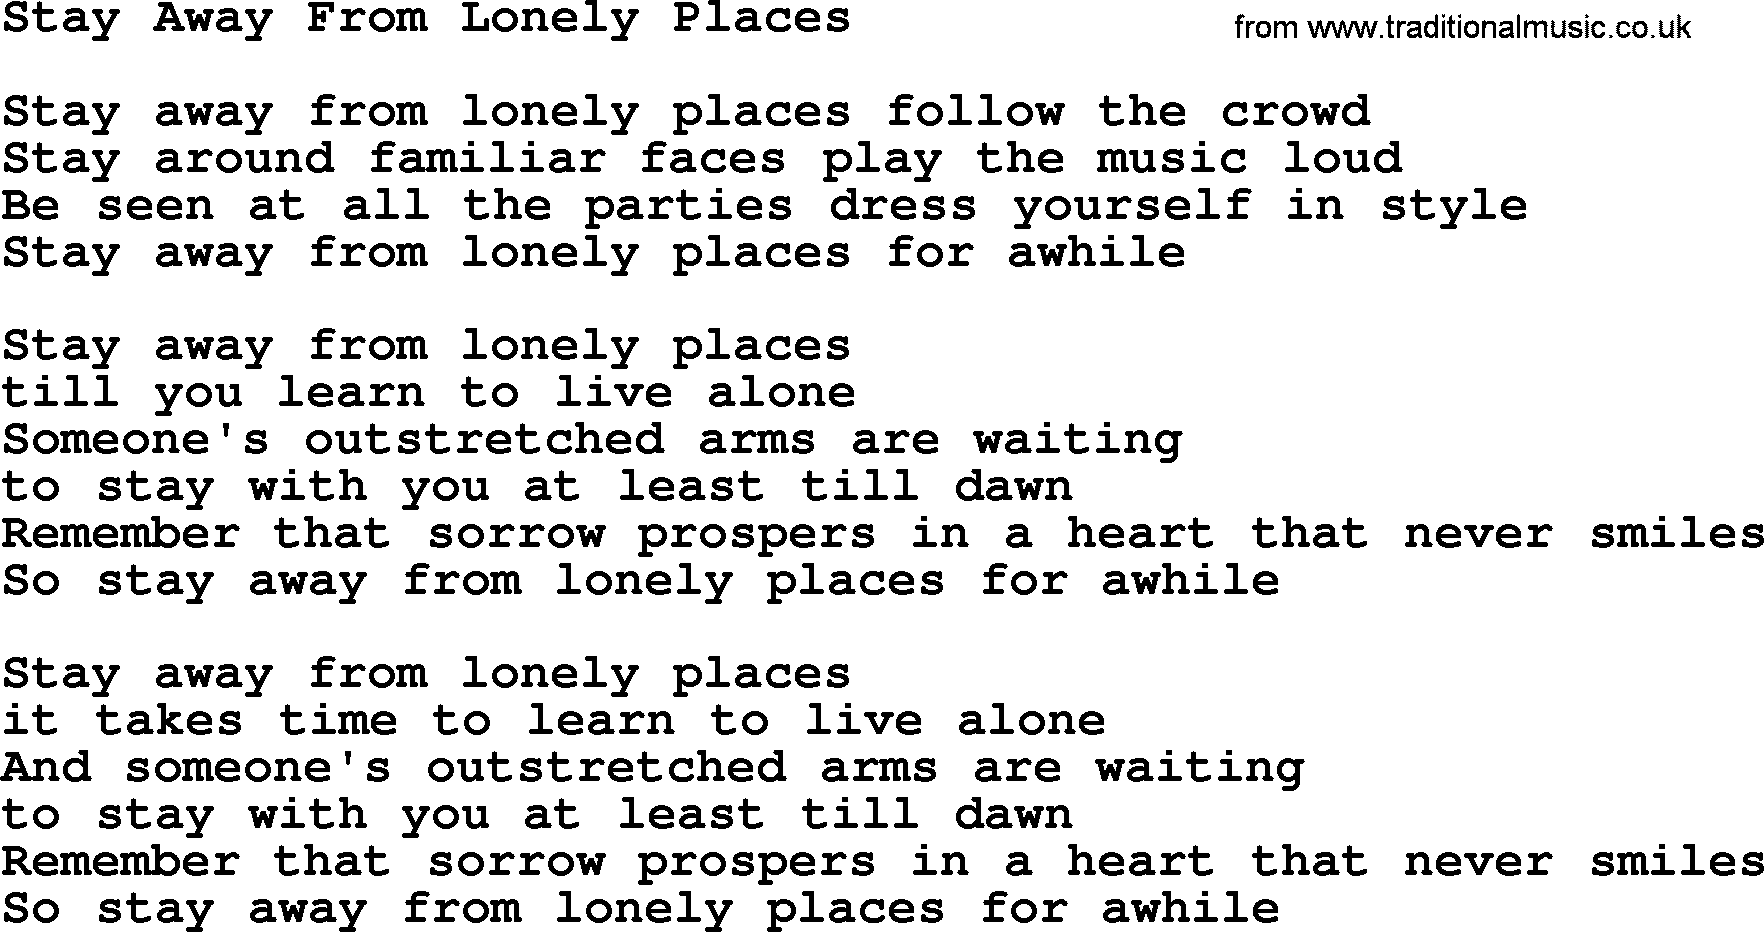 Willie Nelson song: Stay Away From Lonely Places lyrics